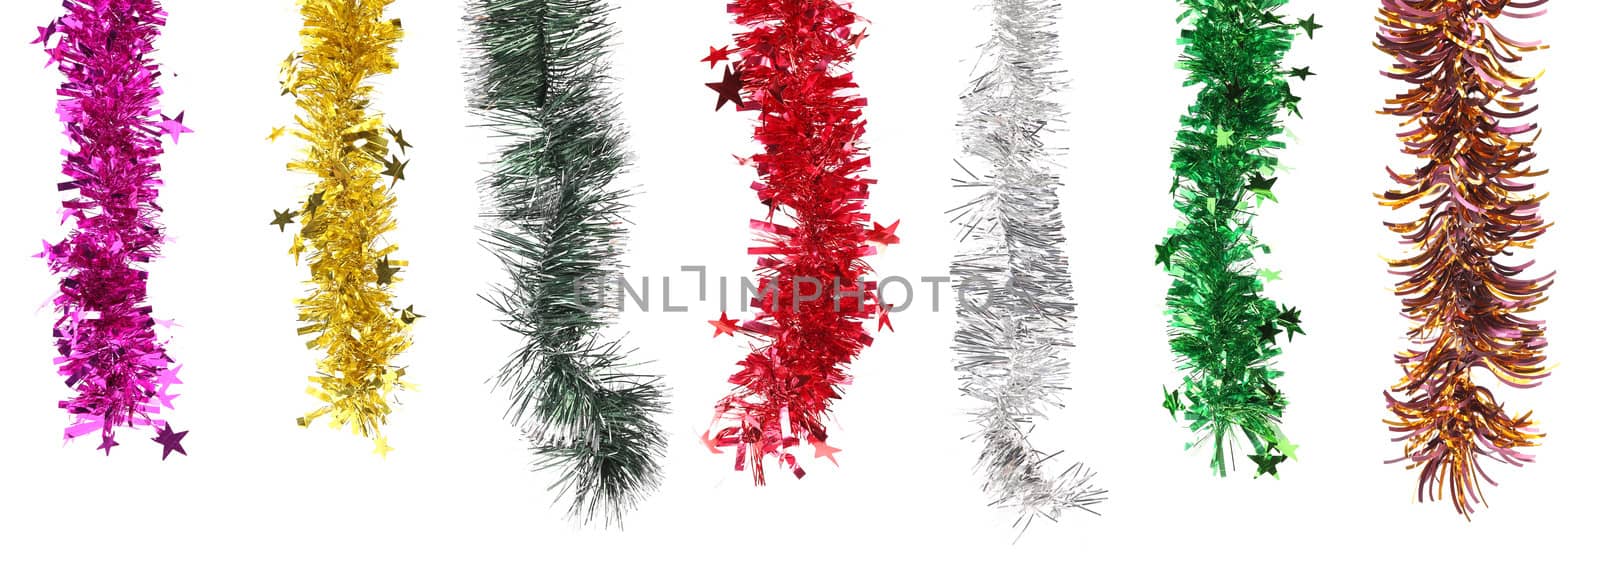 Christmas decoration in row. Isolated on a white background.